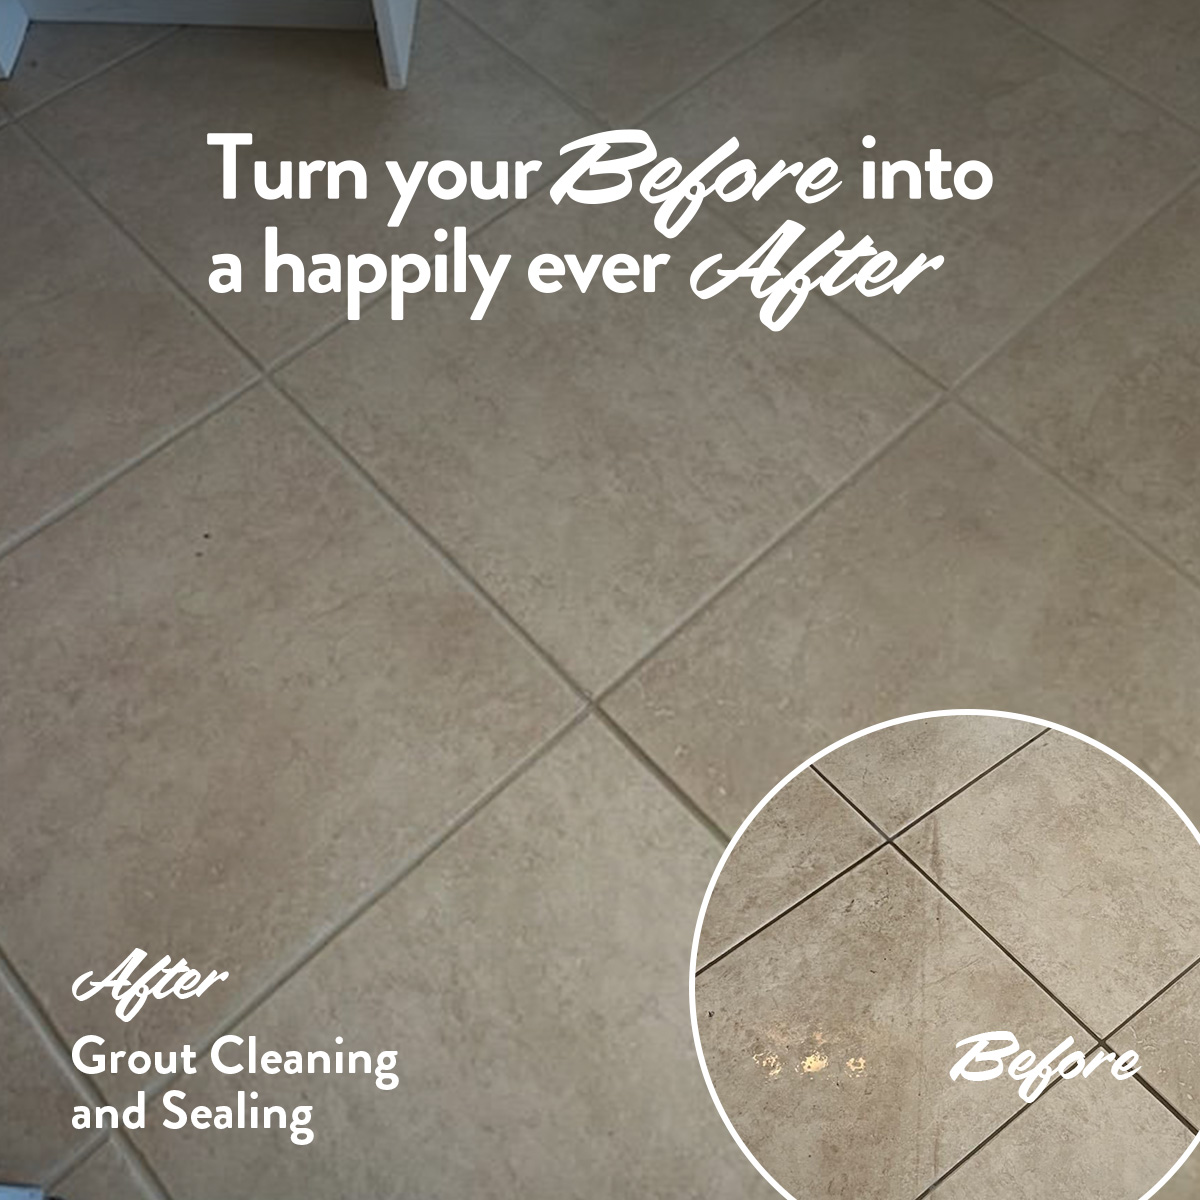 Grout Cleaning and Sealing